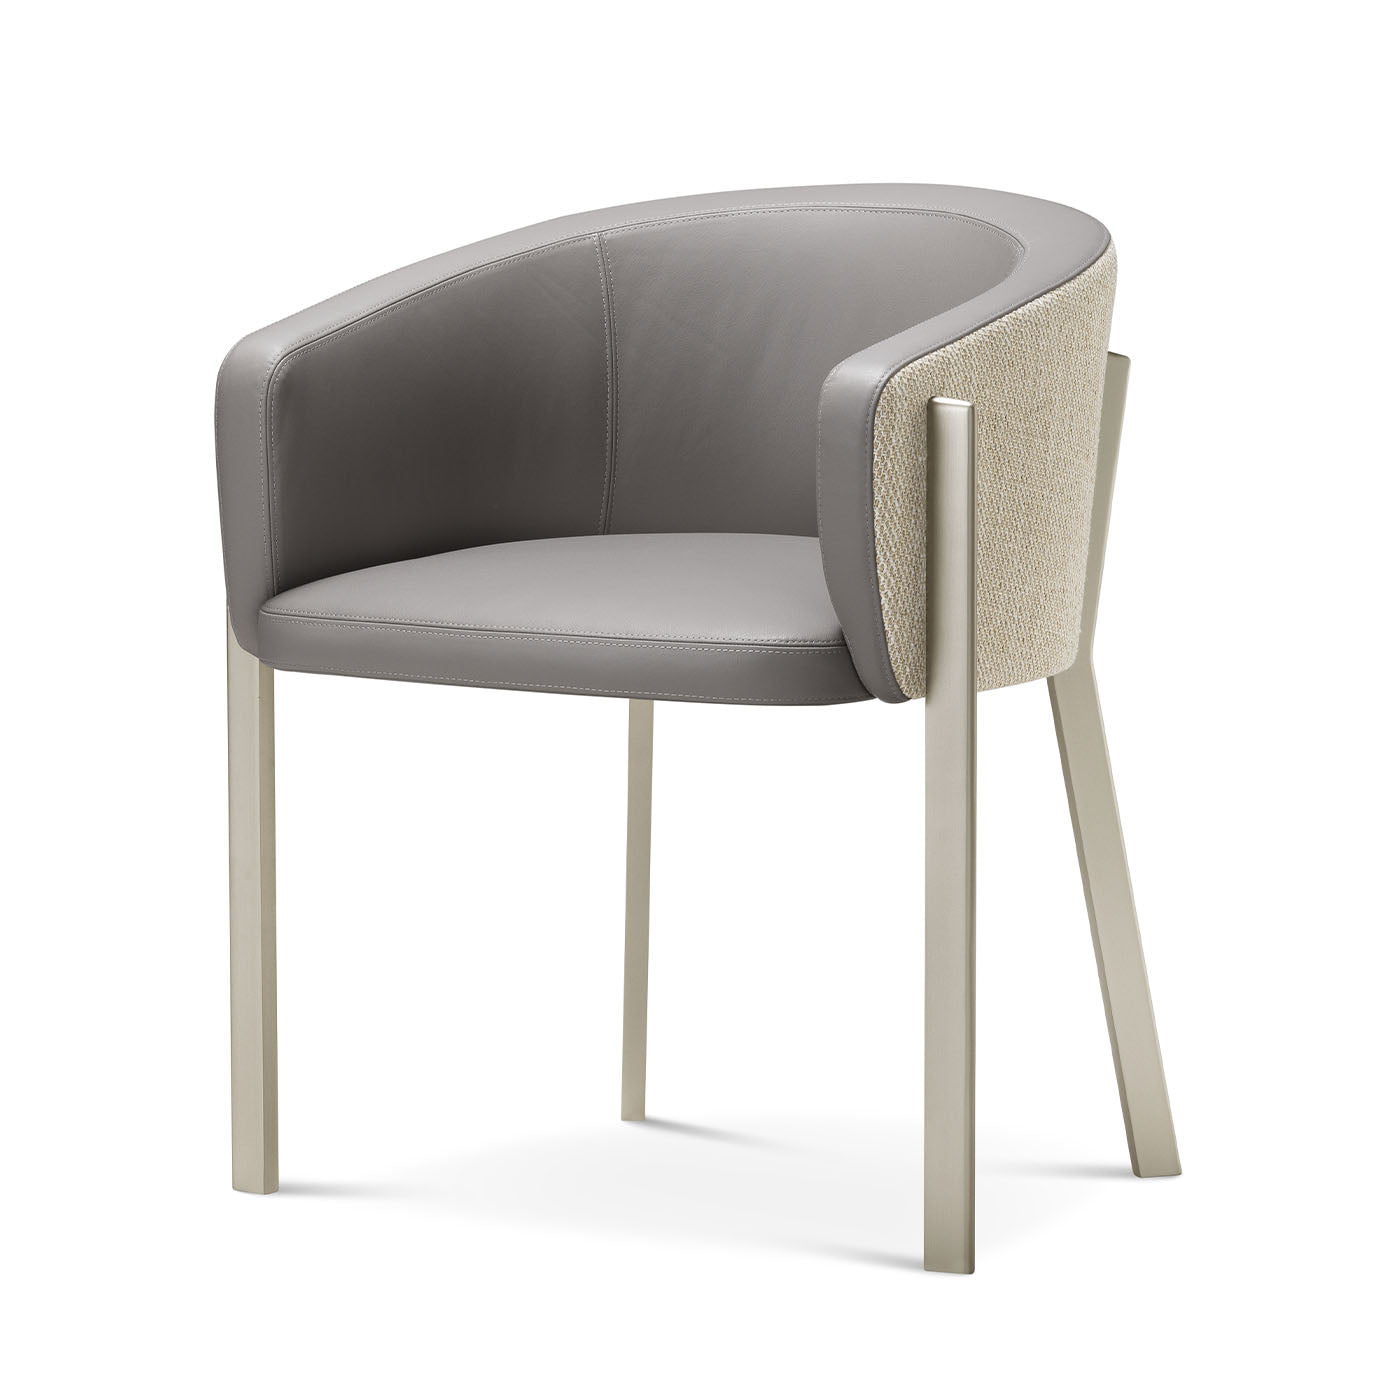 Arch Gray Leather Armchair by Richard Hutten - Alternative view 1